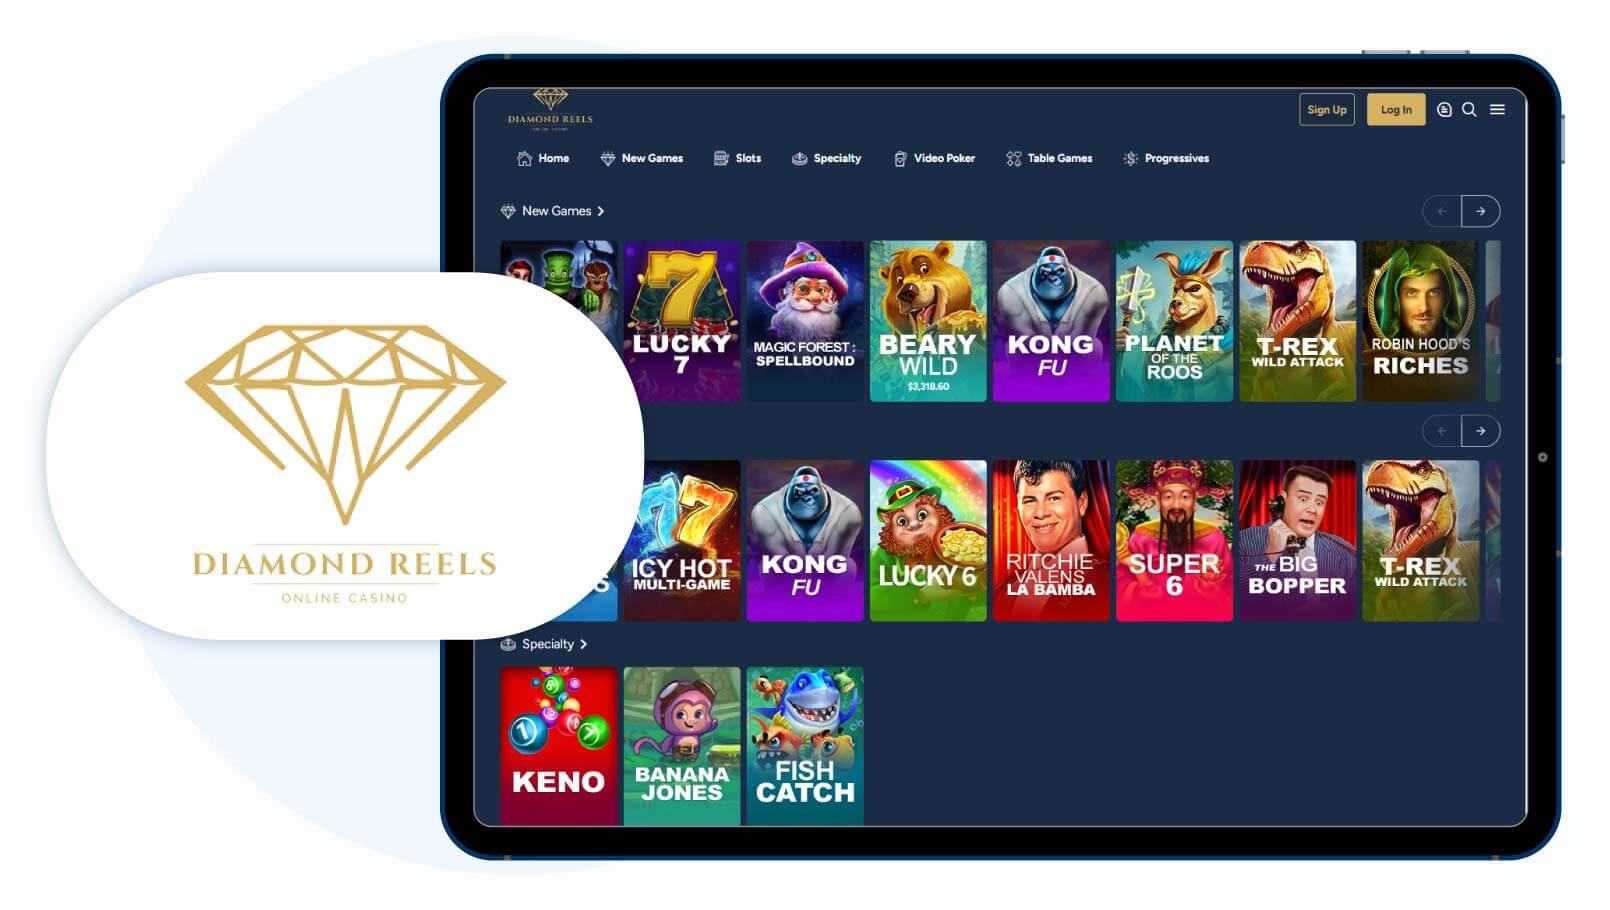 Diamond-Reels-Casino-Best-Casino-with-100-No-deposit-Spins-and-Top-Customer-Support